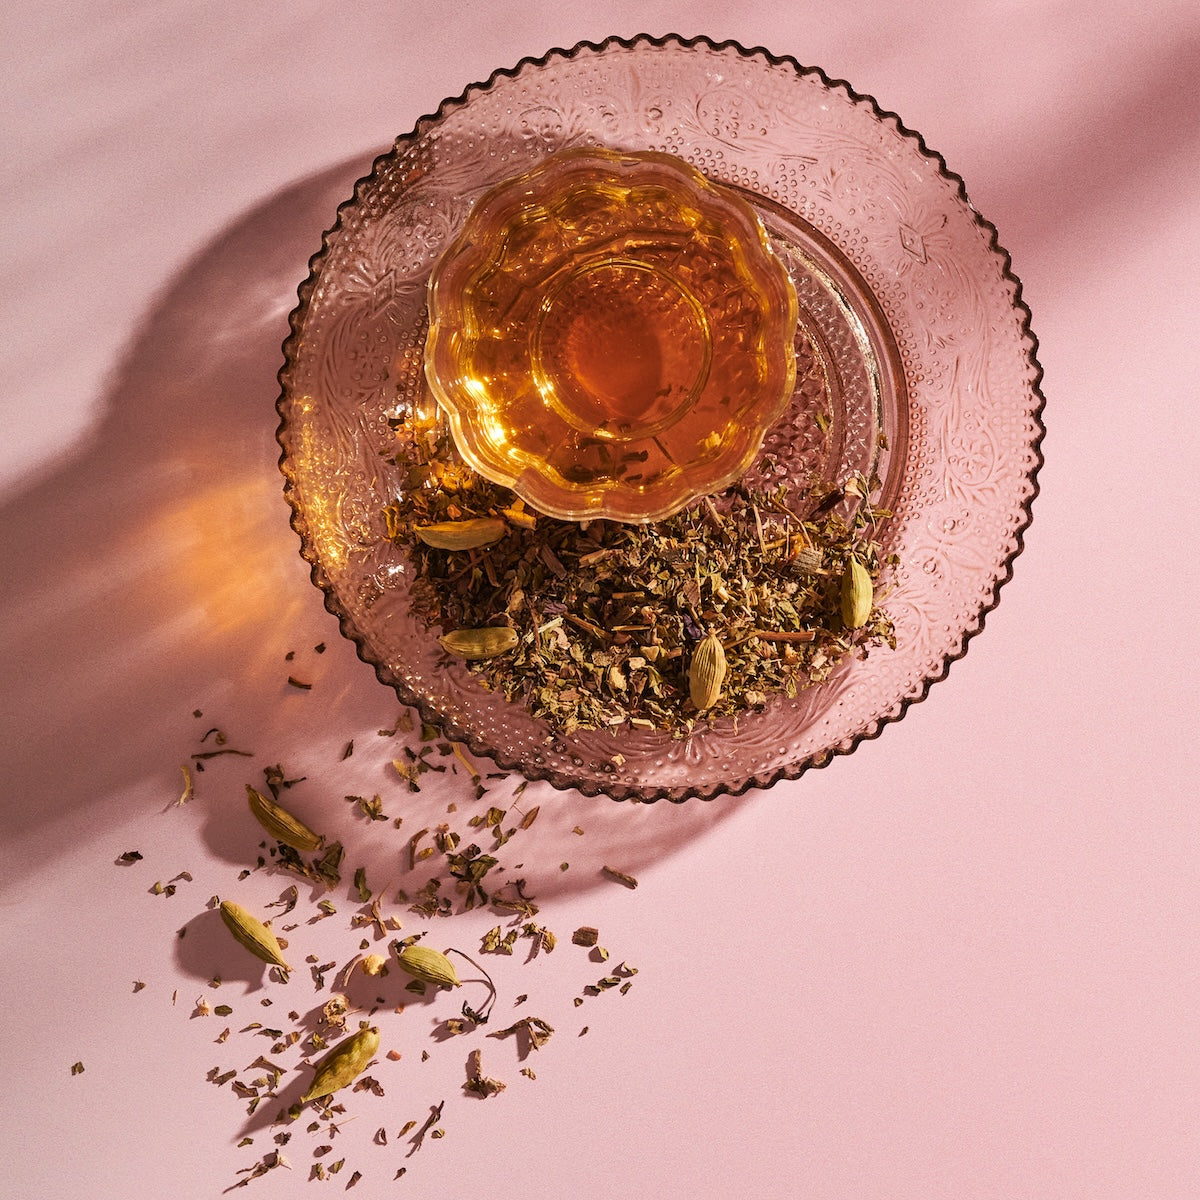 A glass teacup filled with The High Priestess: Wisdom Tea for Powerful Dreams & Illuminated Insights by Magic Hour sits on a decorative saucer with loose tea leaves and cardamom pods scattered around. The setup is on a pink surface, with the caffeine-free tea casting a warm amber hue against the saucer's intricate pattern.